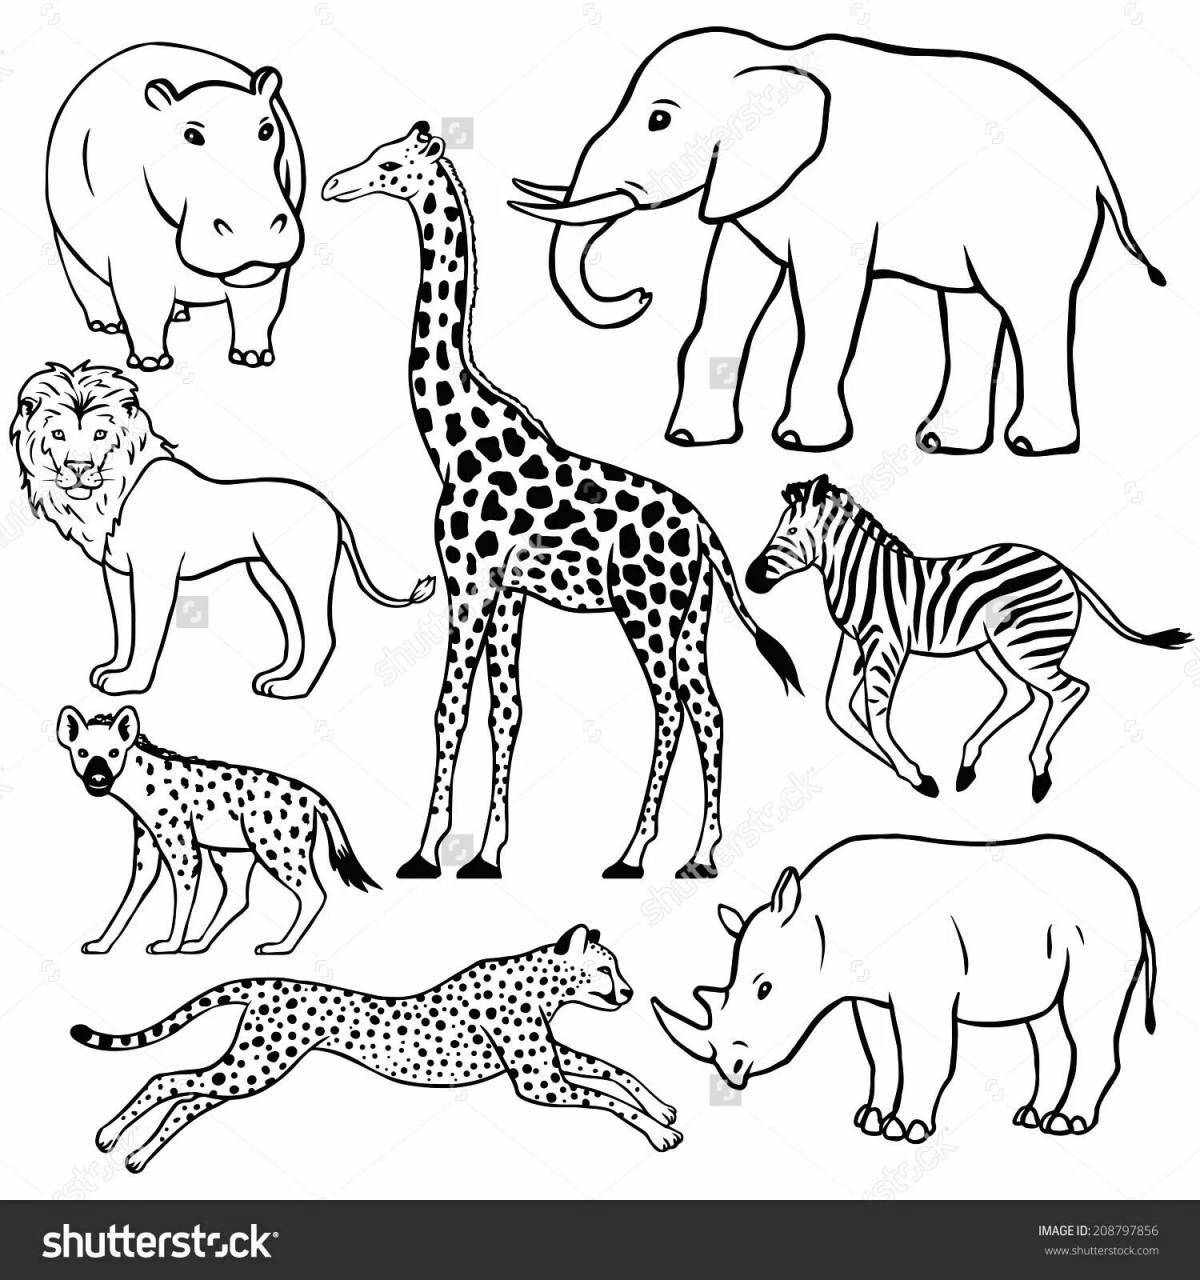 A fascinating coloring book animals of hot countries for children 6-7 years old